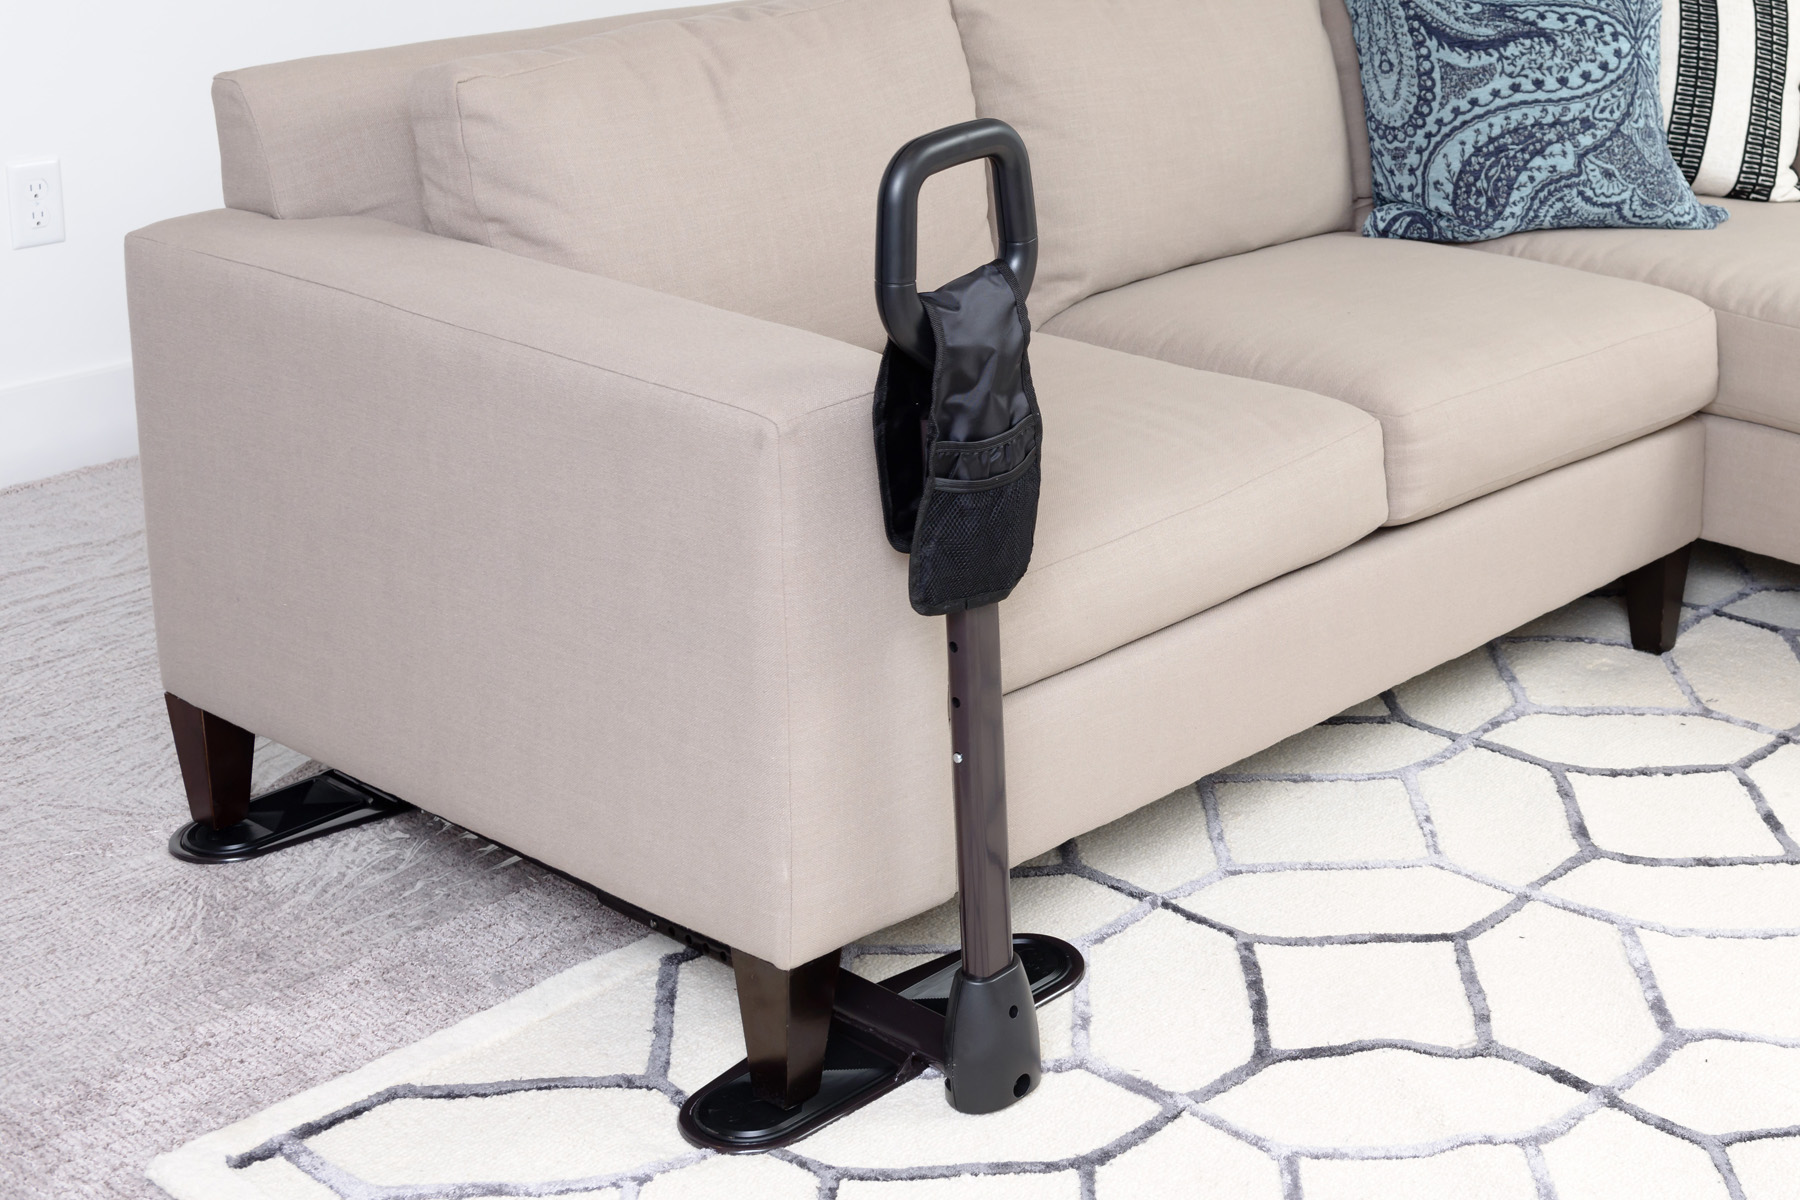 NEPPT Couch Cane Stand Lift Assist for Elderly Standing Aids Supports Assistance Bed Handle Bedside Assist Couch Rail Seniors Fall Prevention